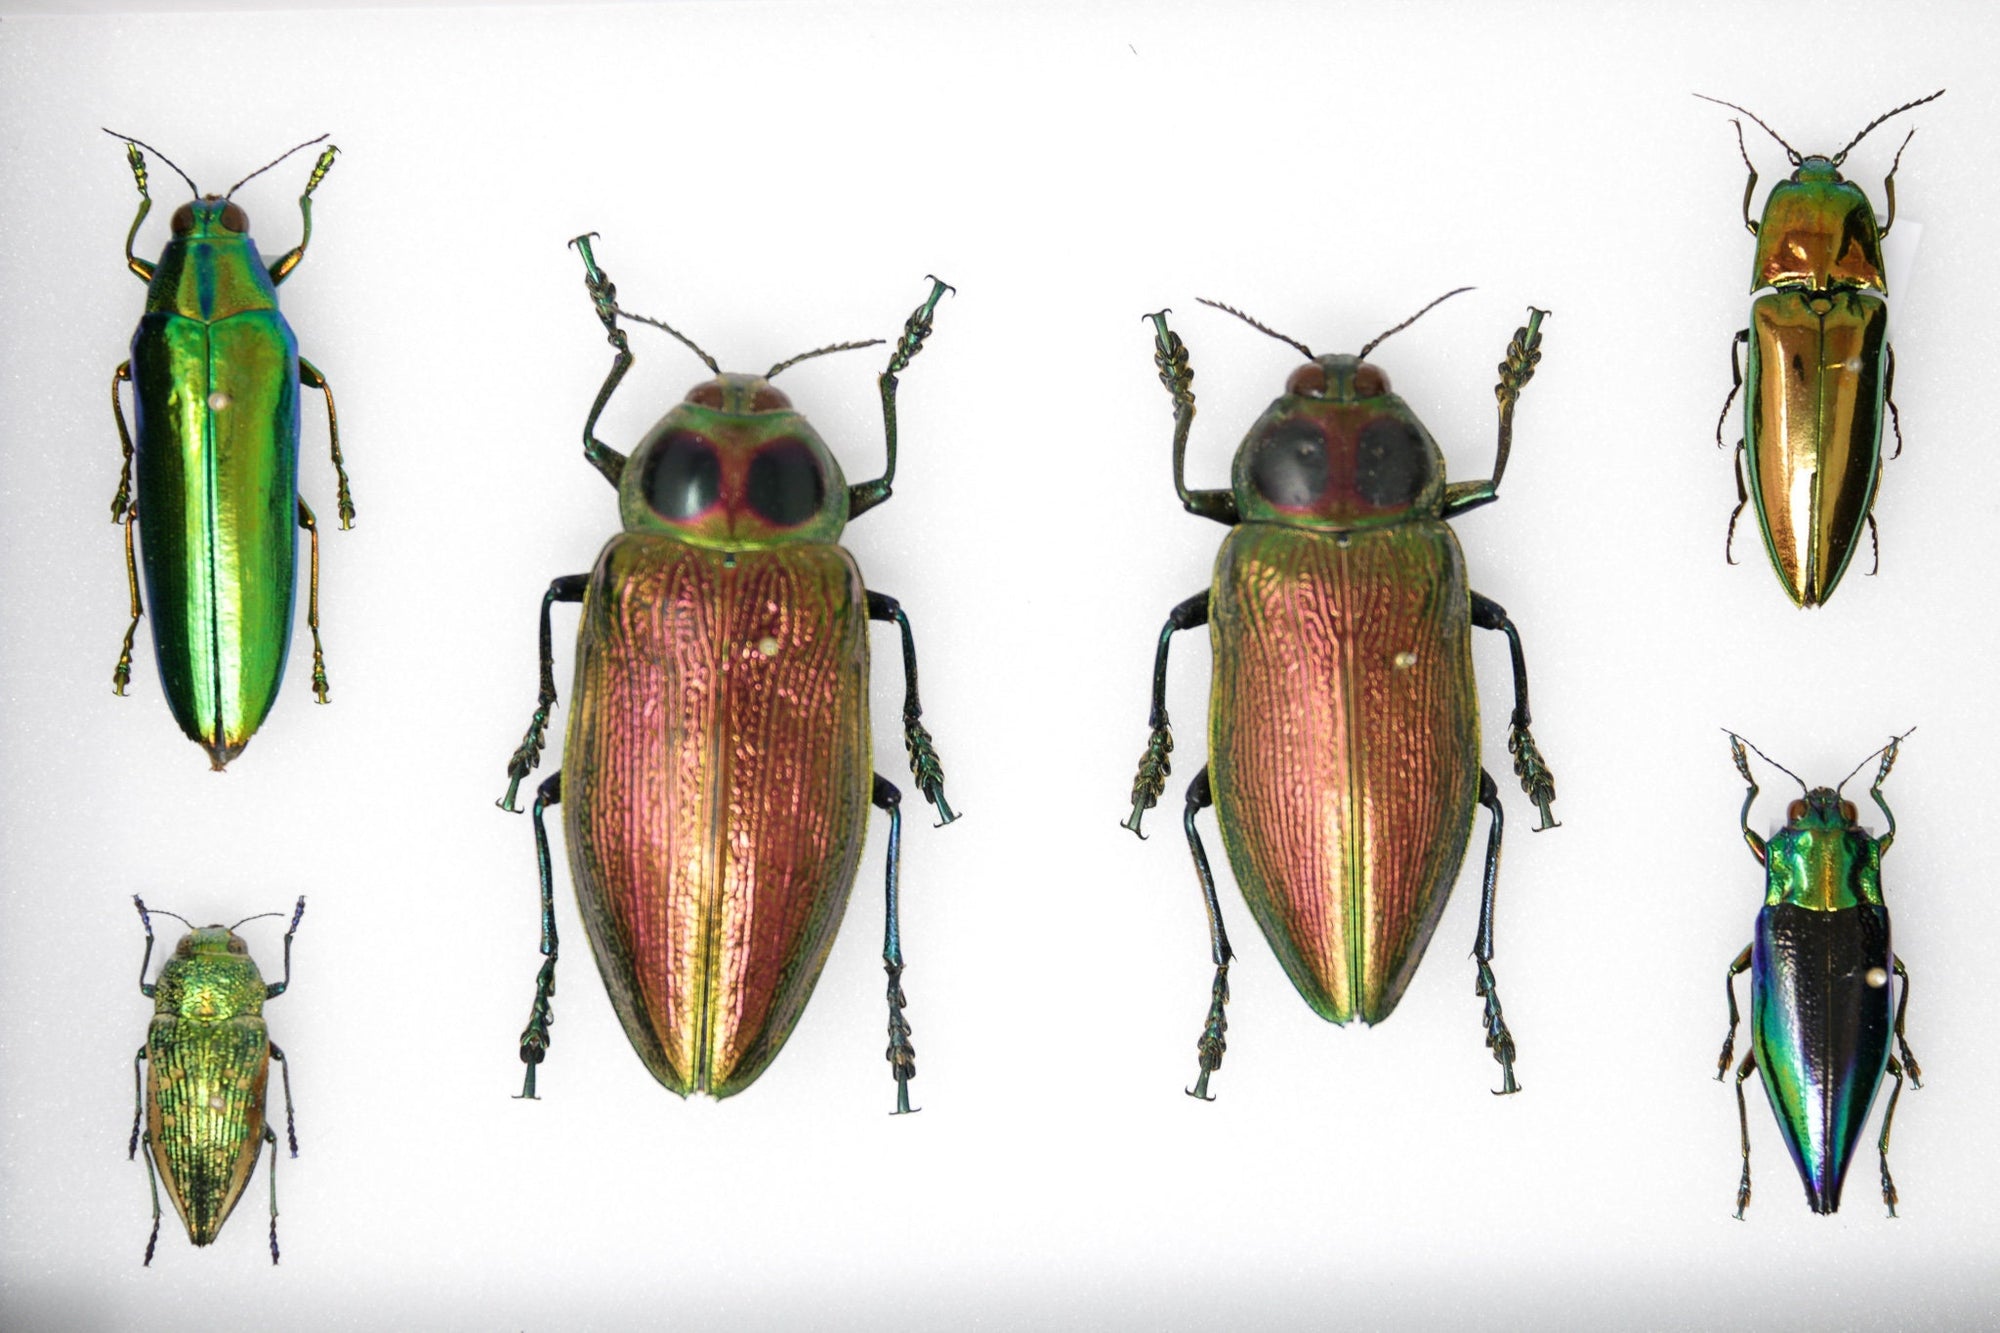 A Collection of Exotic Jewel Beetles (Buprestidae) inc. Scientific Collection Data, A1 Quality, Entomology, Real Insect Specimens #SE24